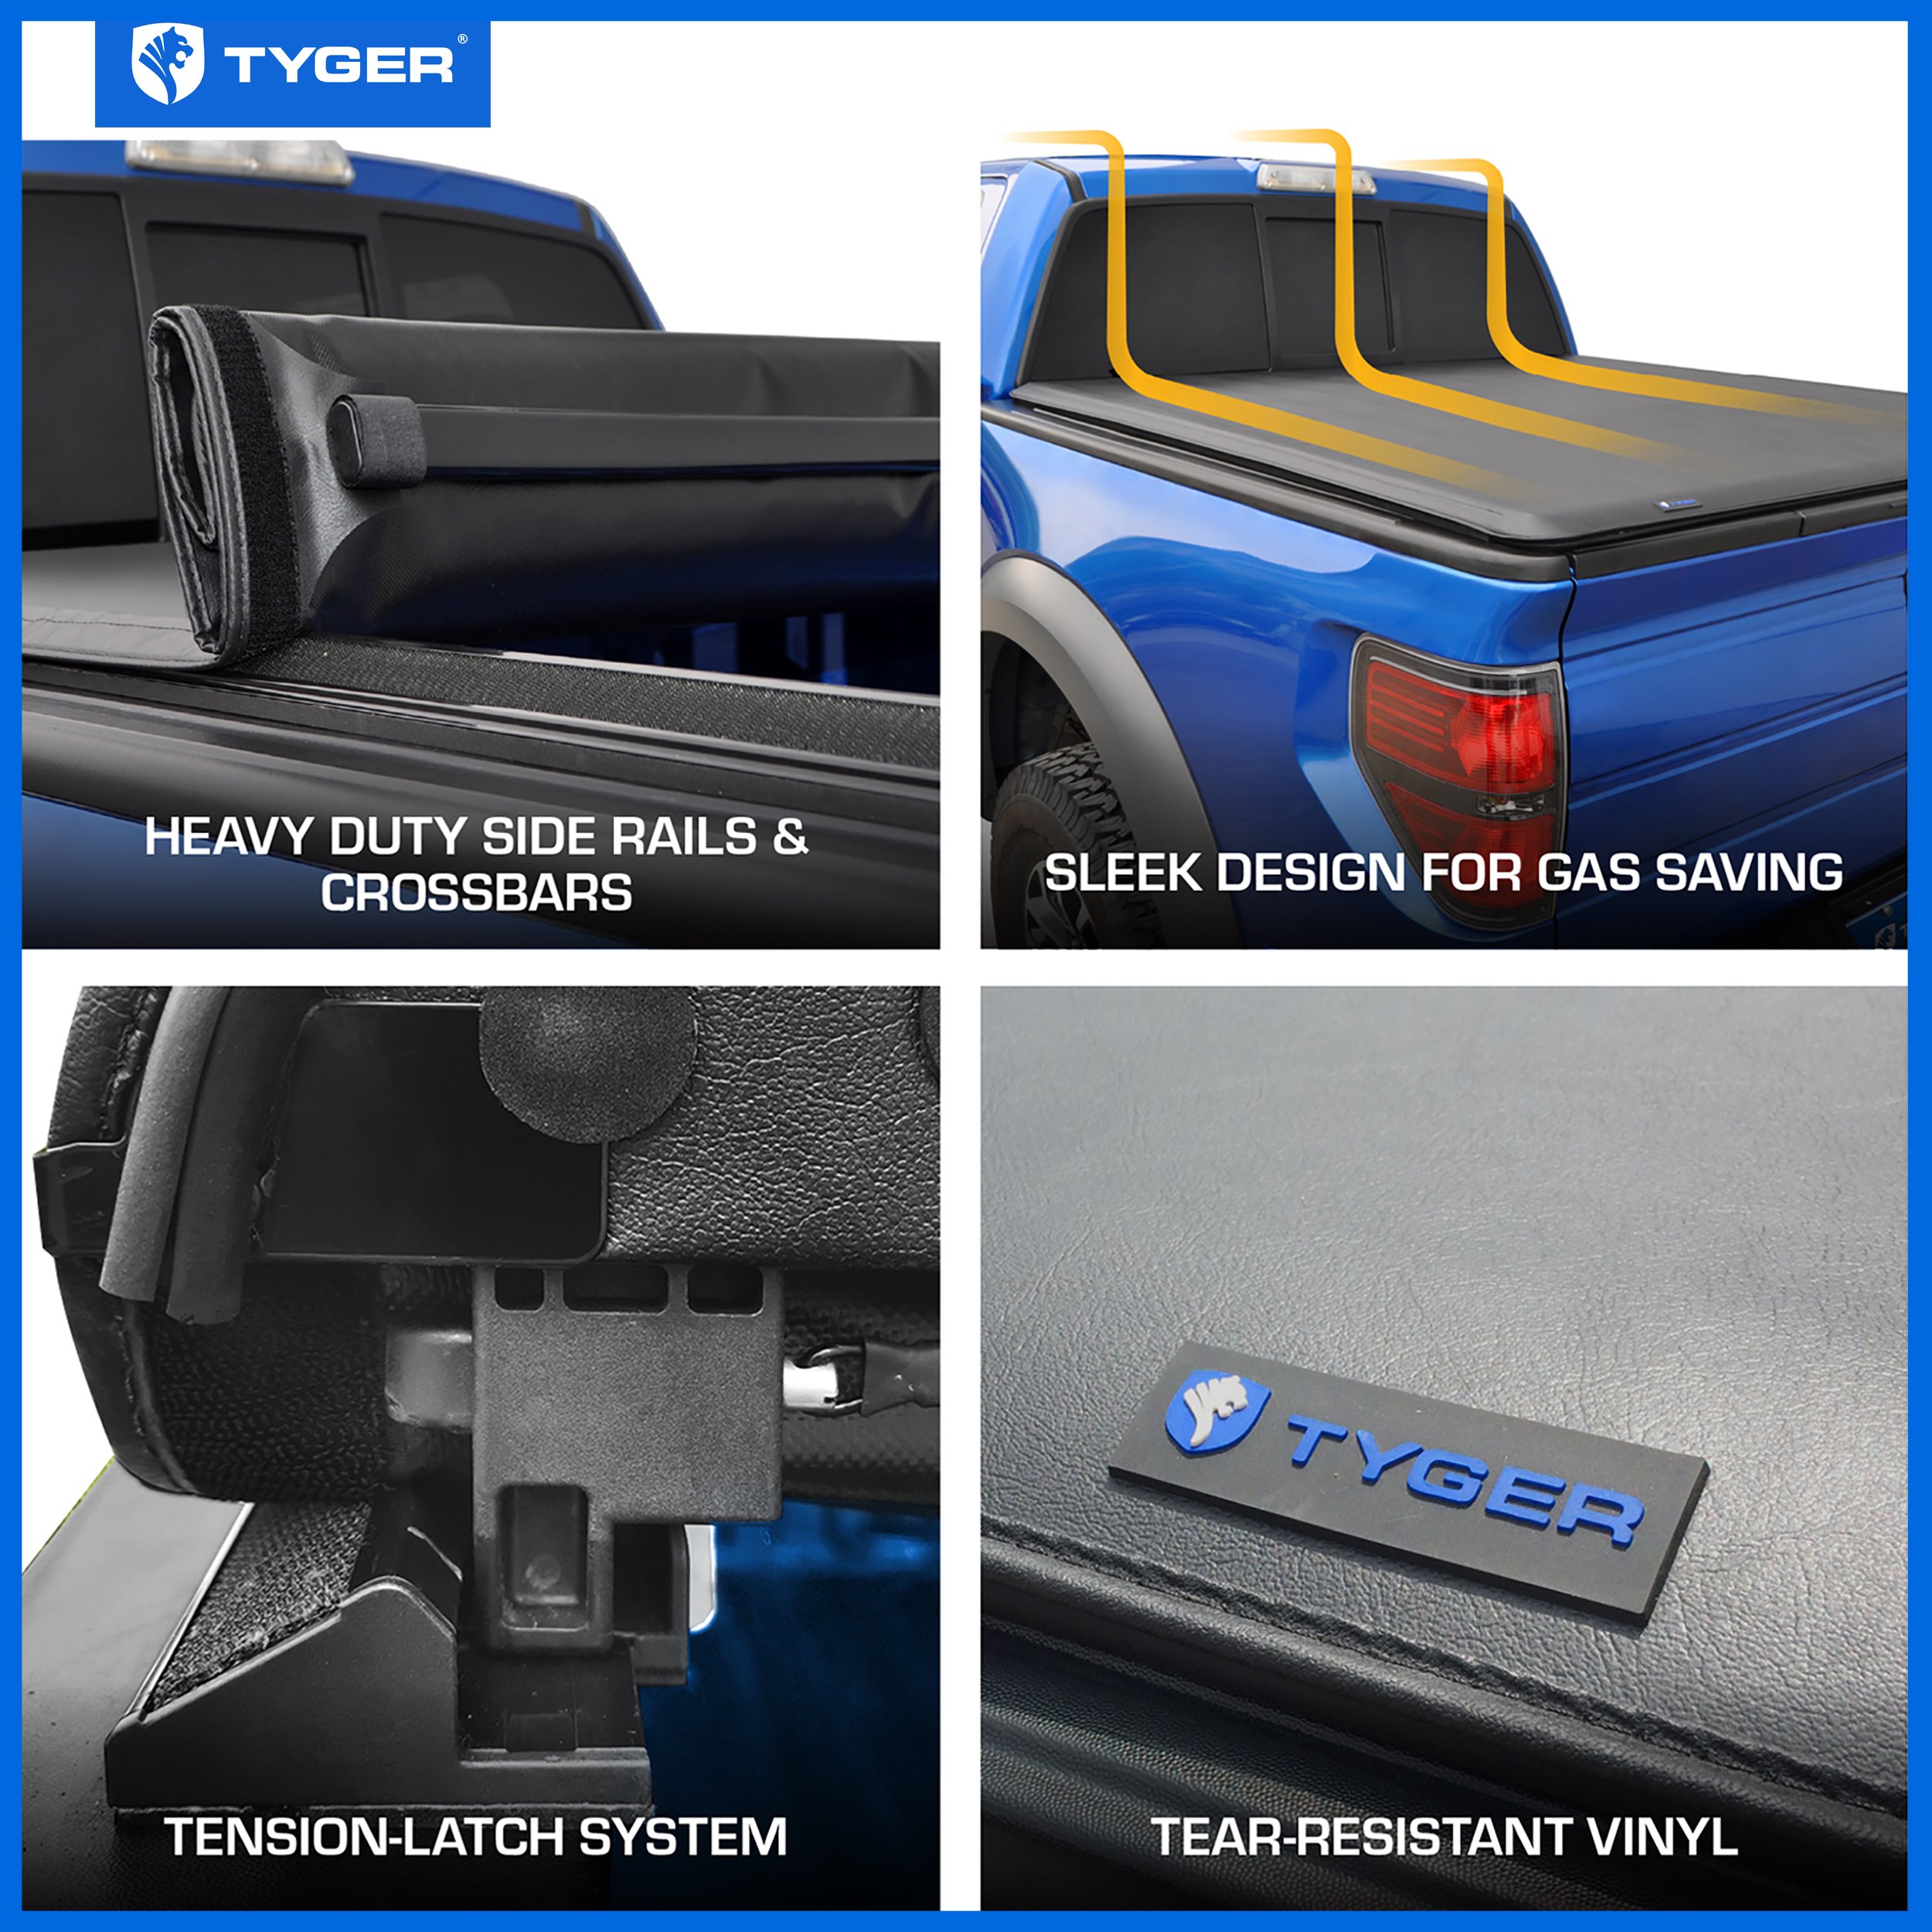 TYGER T1 Soft Roll-up fit 2009-2014 Ford F-150 5.5' Bed